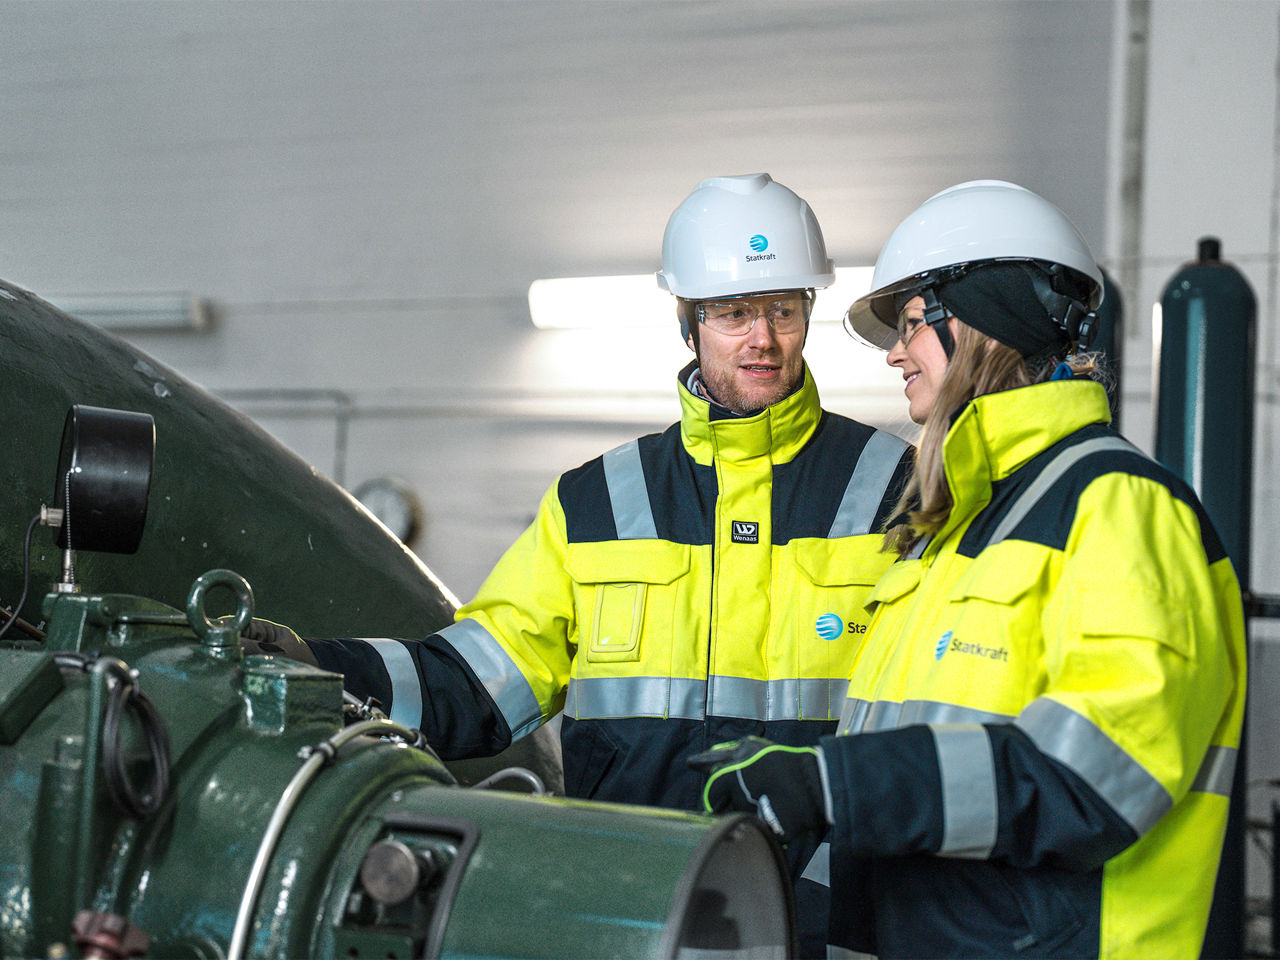 Inside Svean hydro power plant where two Statkraft colleagues stand next to a power turbine.